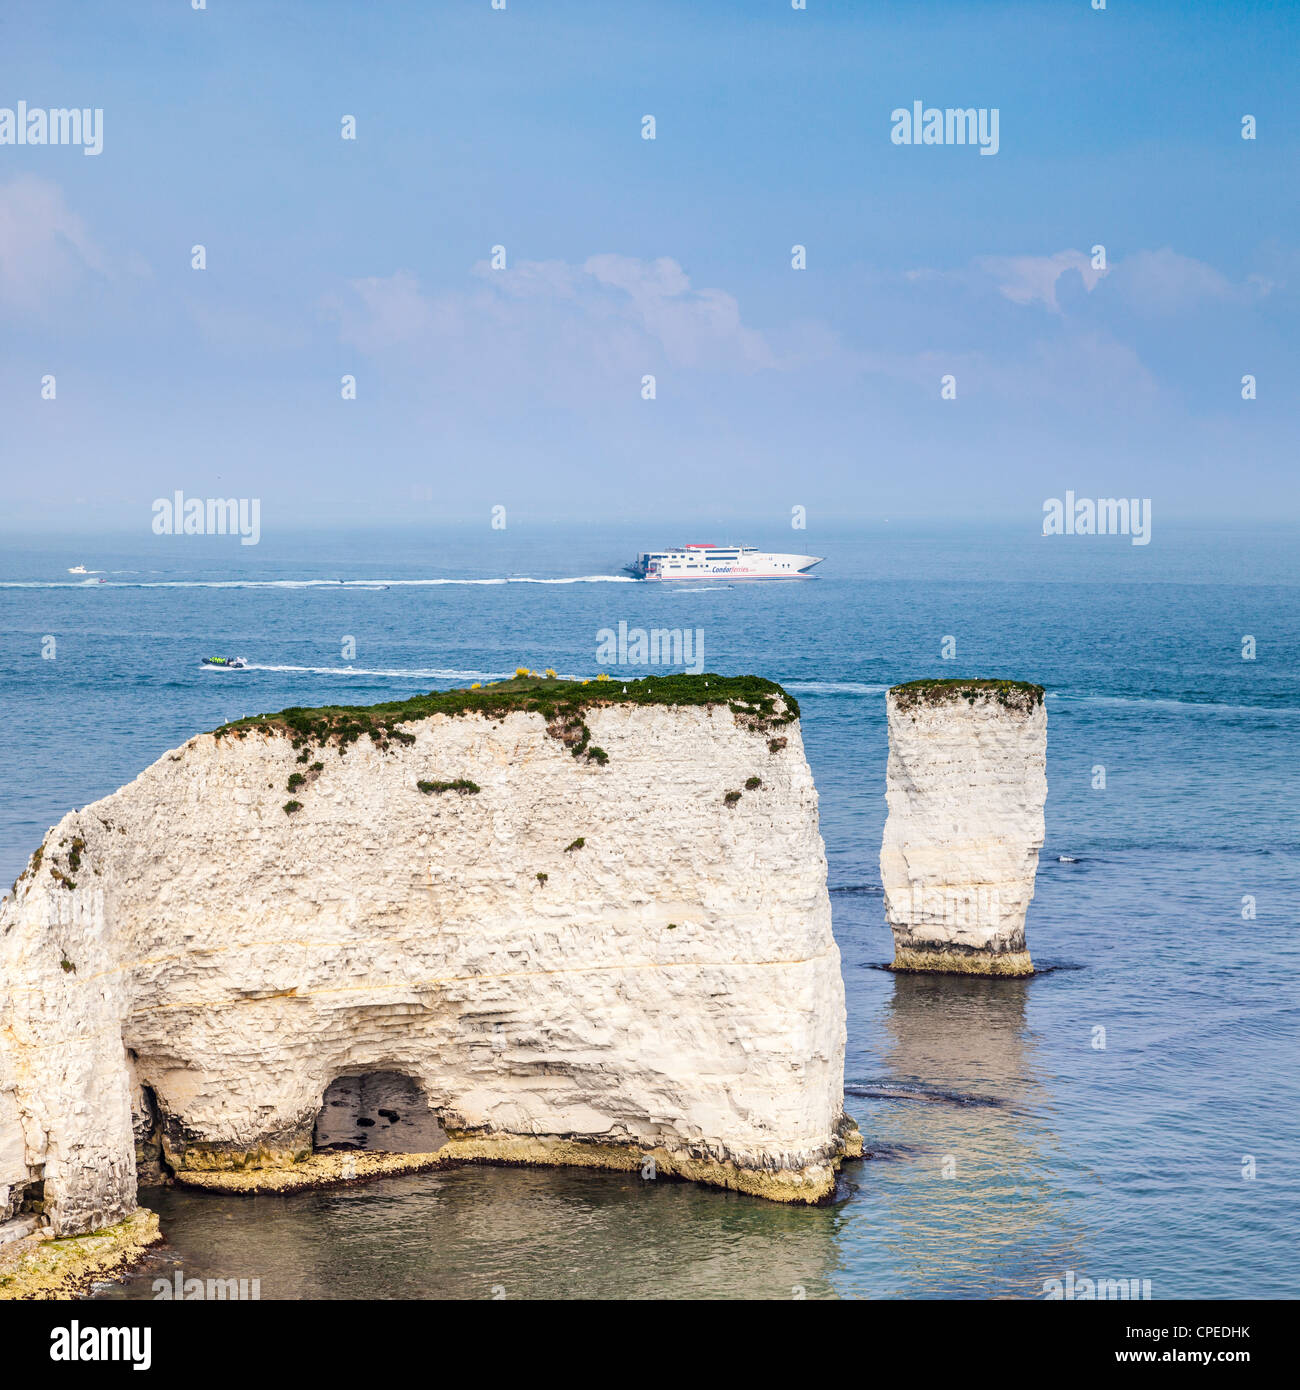 The Old Harry Rocks near Swanage in Dorset, England, with a catamaran fast ferry and other boats passing in the background. Stock Photo